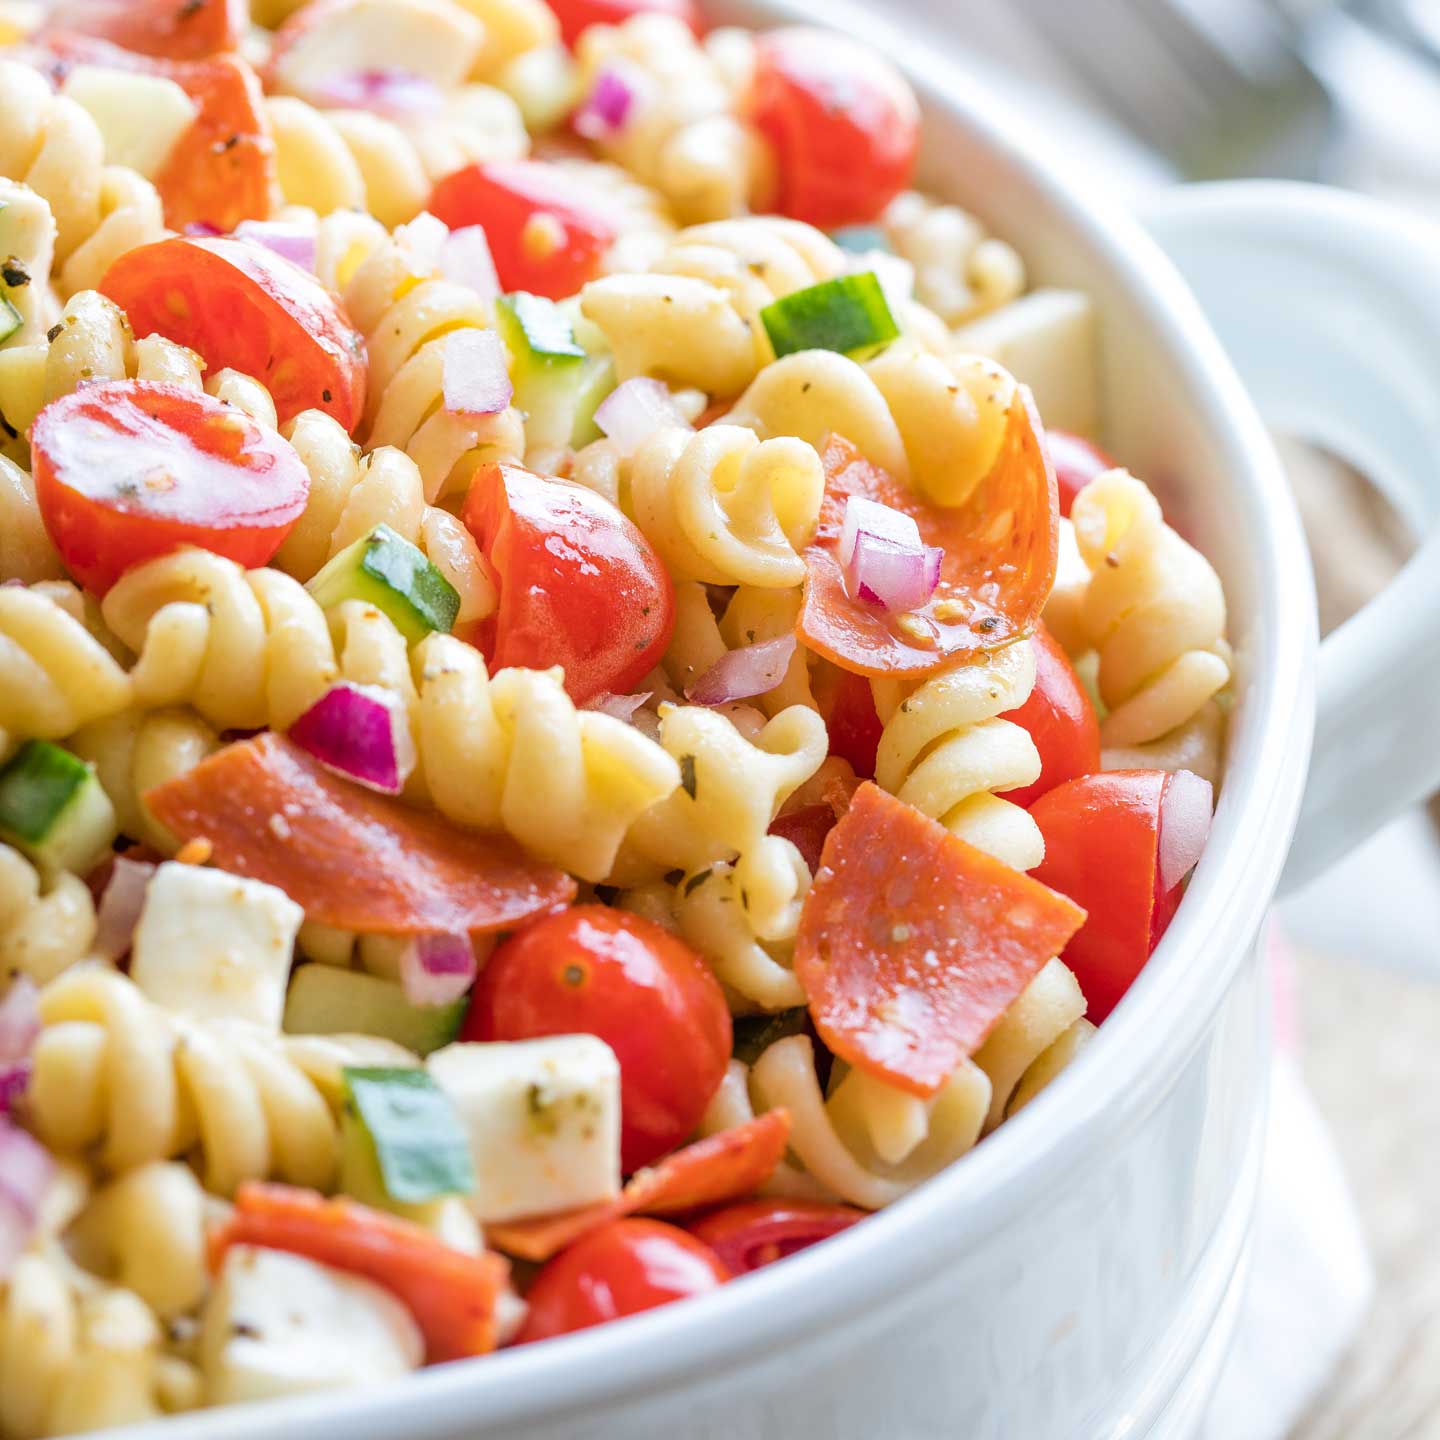 Super closeup shot of the pasta salad recipe, finished and in a serving bowl.